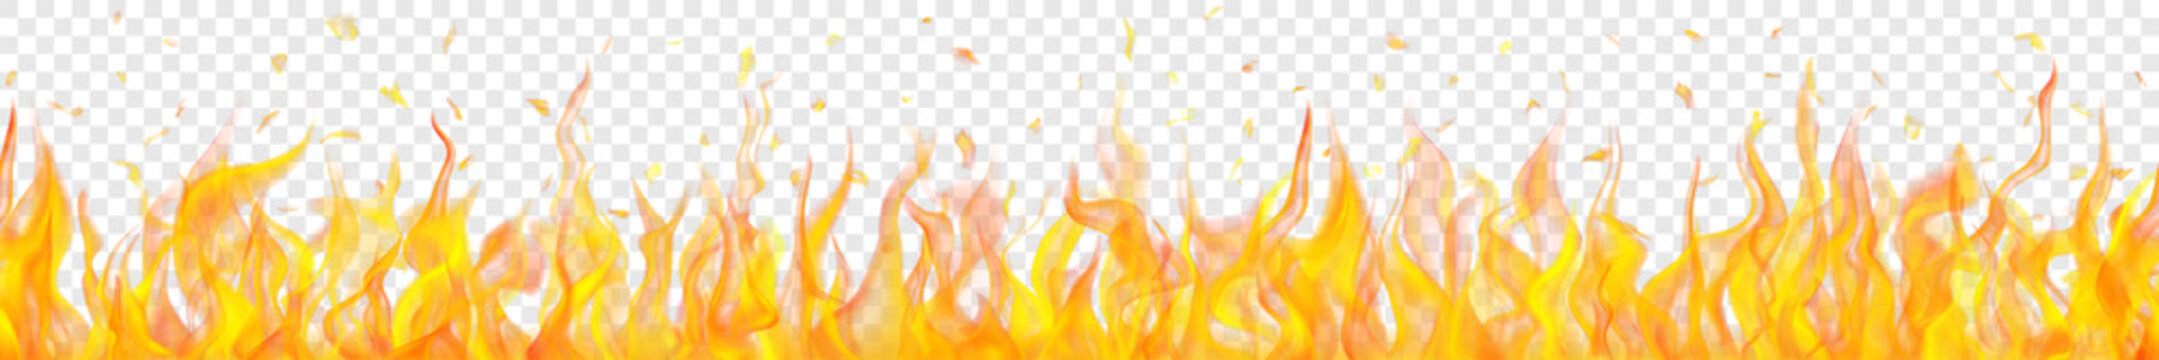 Baner of translucent fire flames and sparks with horizontal repetition on transparent background. For used on light illustrations. Transparency only in vector format